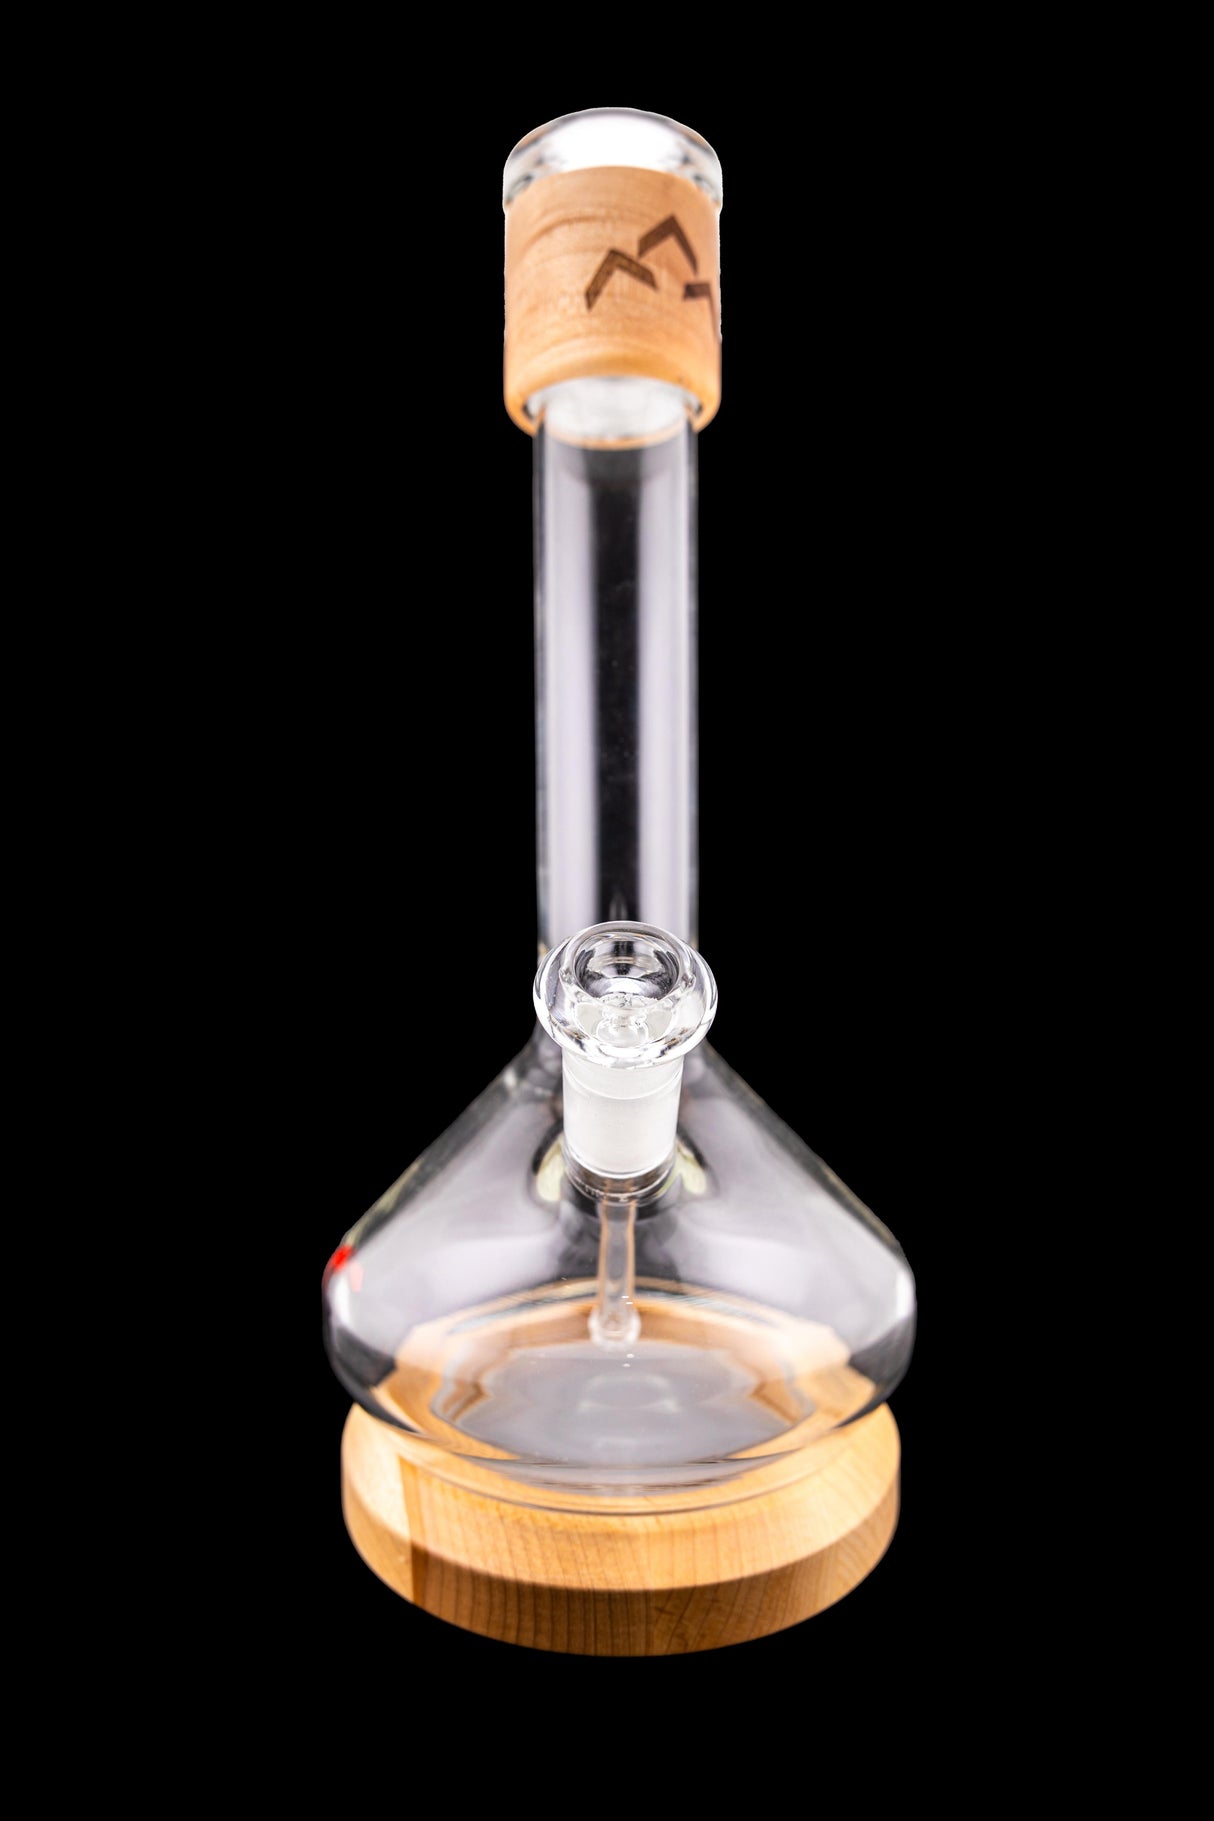 Canada Puffin Borealis 14.25" Beaker Bong, Front View on Seamless Black Background